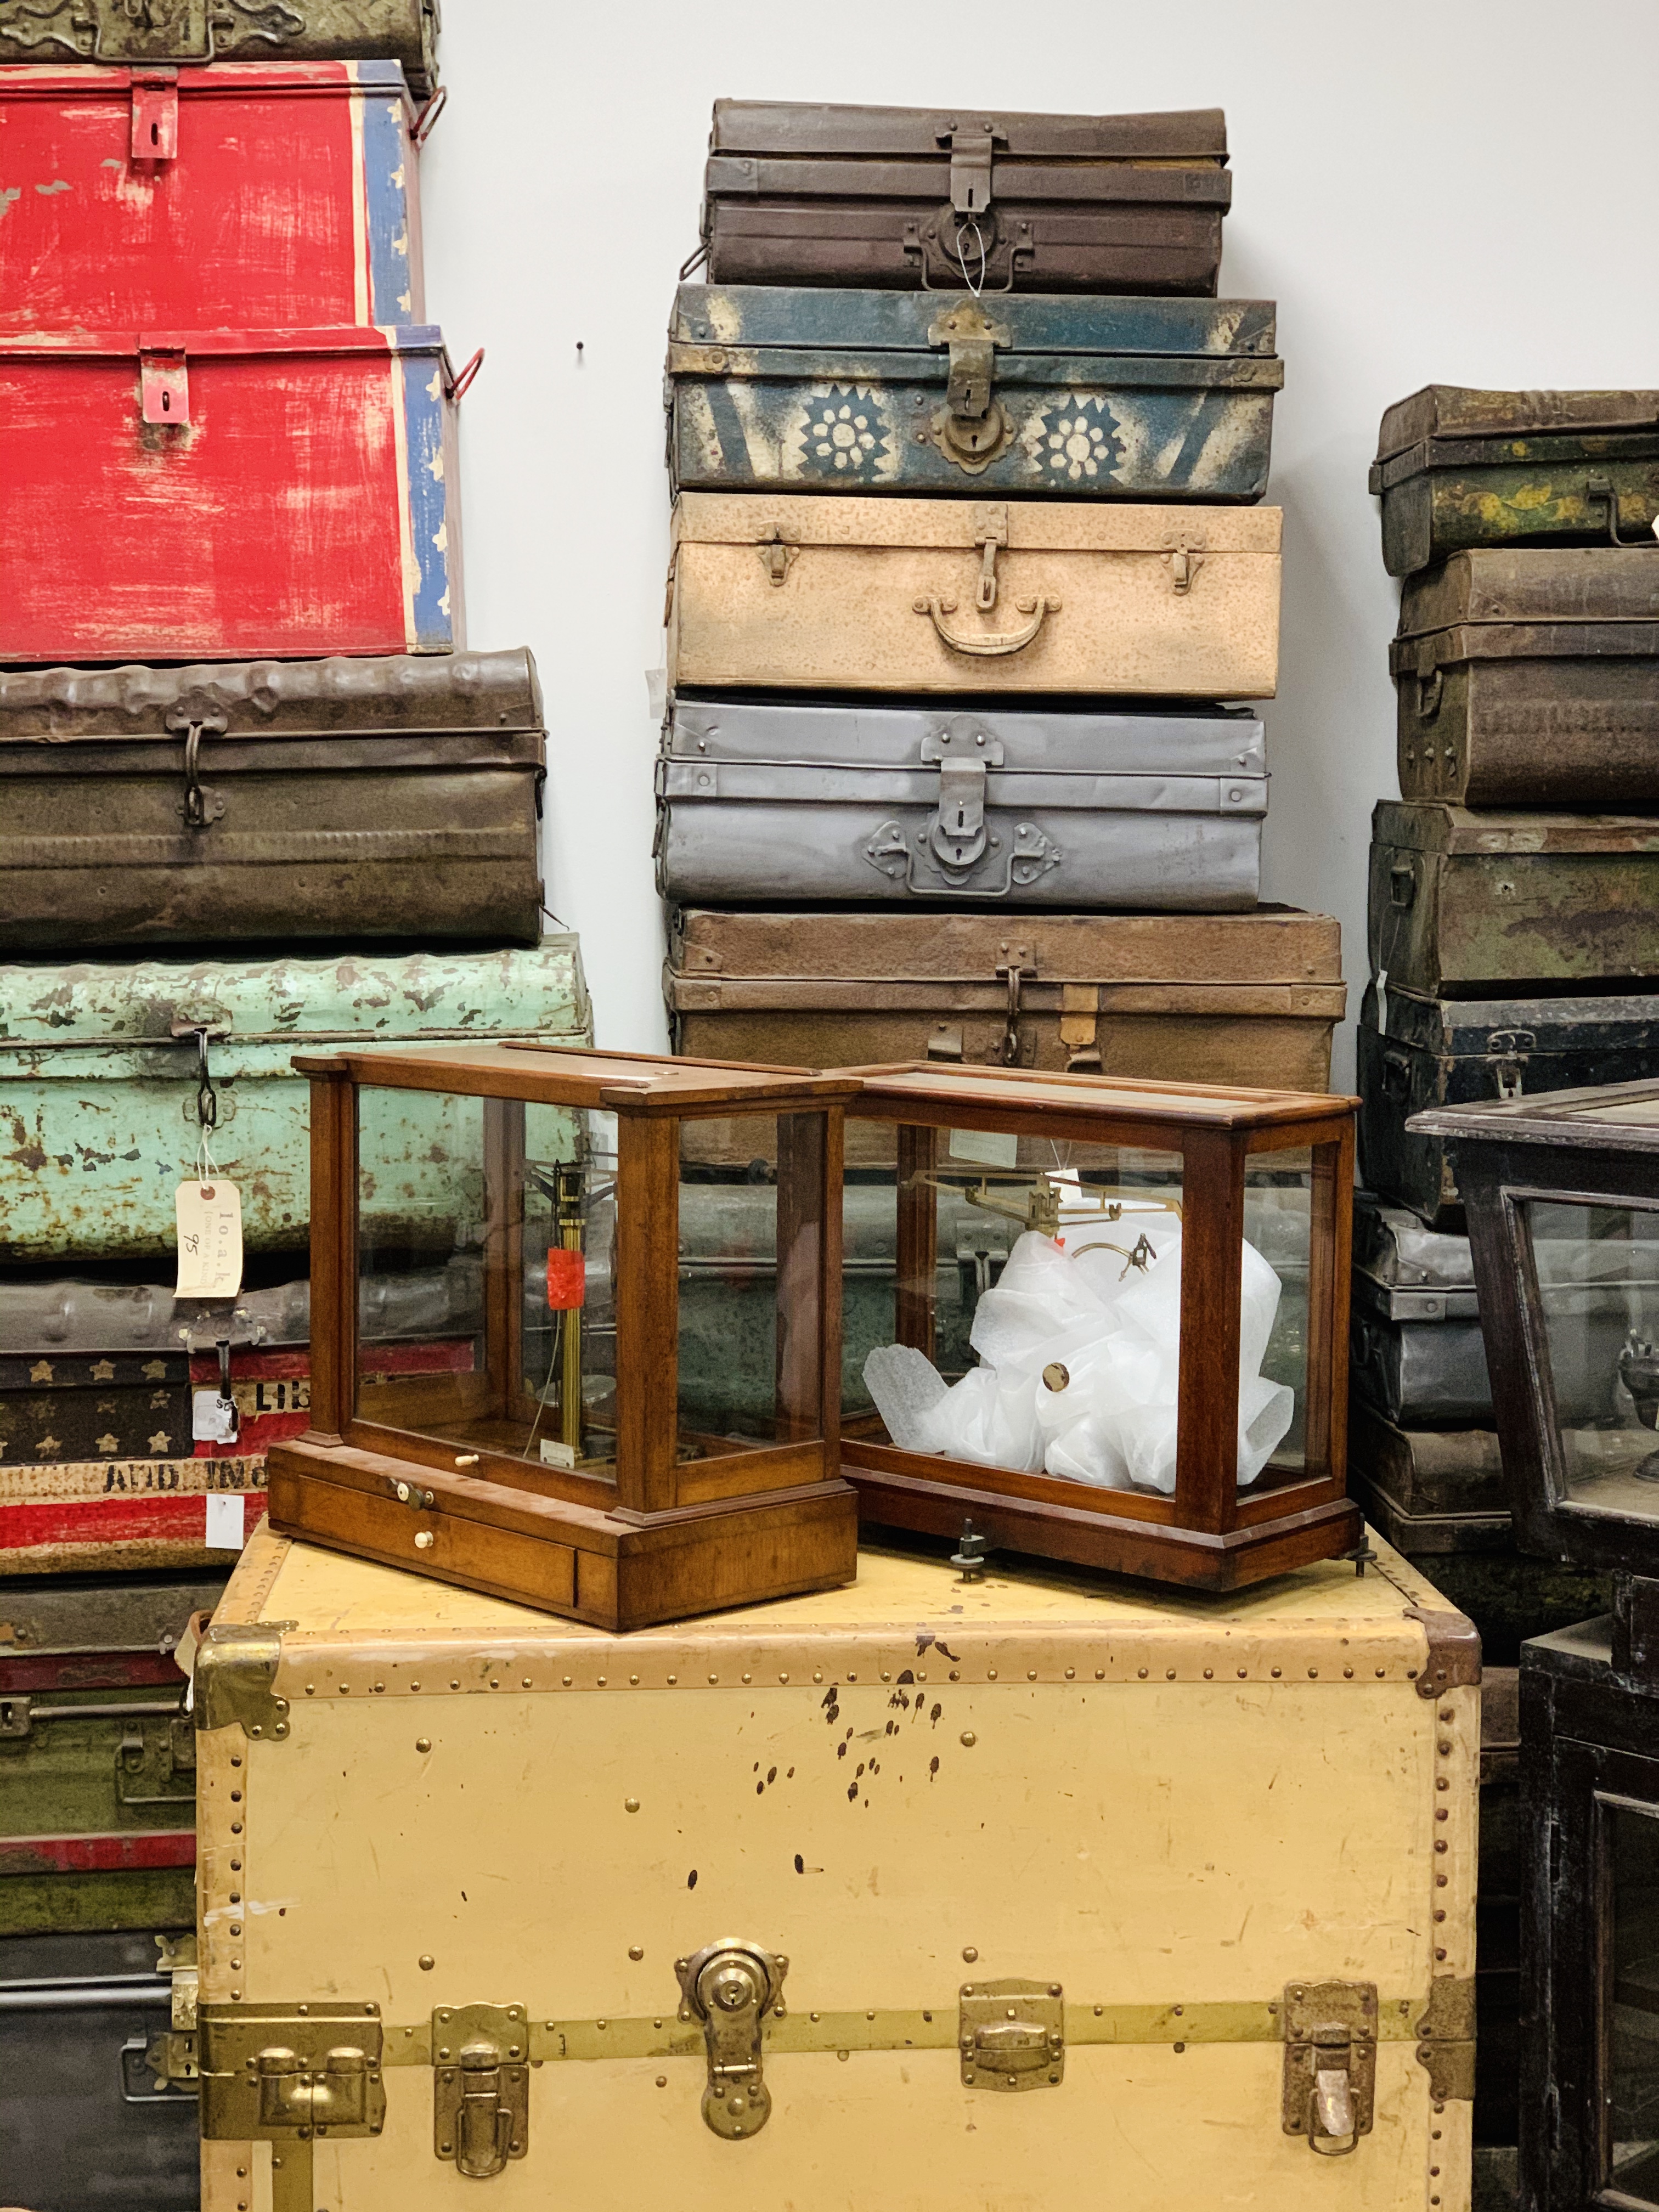 baskets and suitcases piled high at an antique flea market